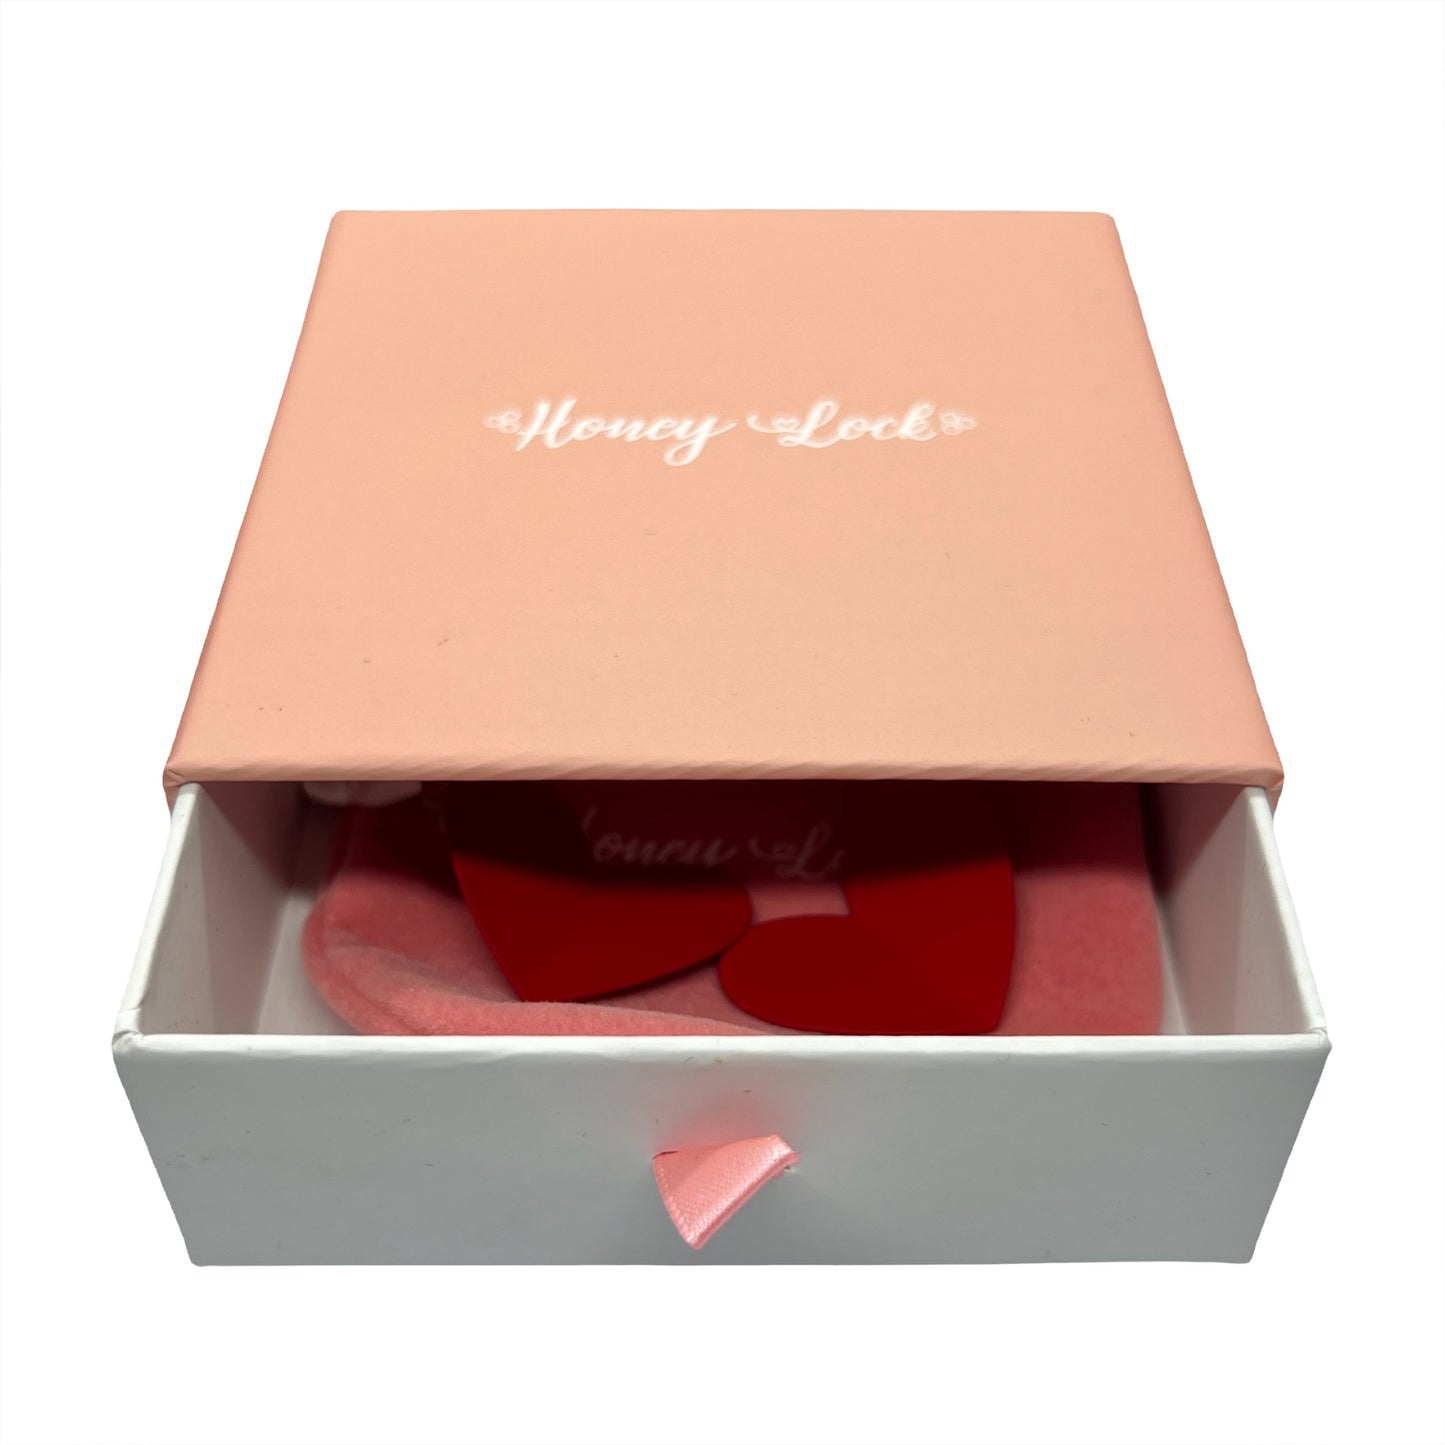 Red Heart Flapy Studs Earrings